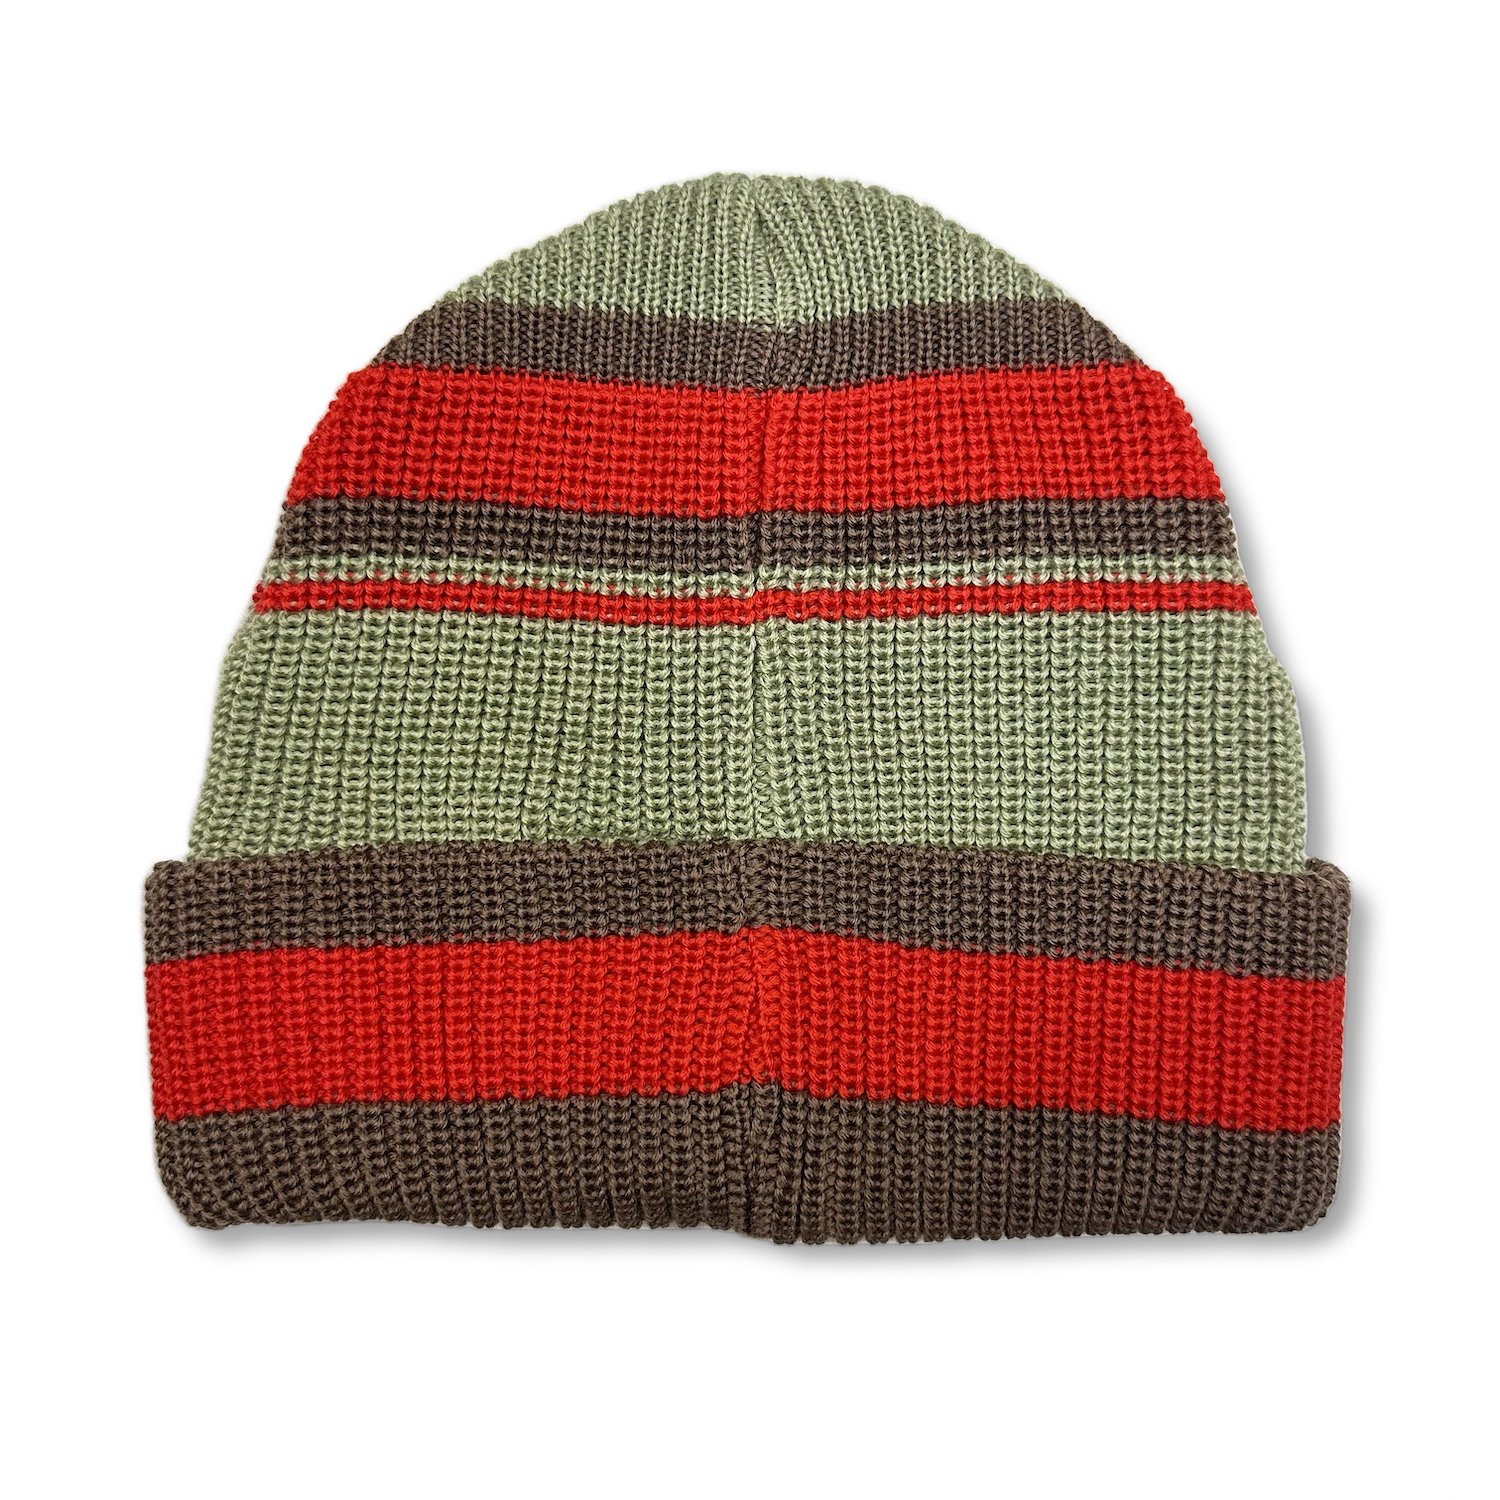 NOROLL<br>CONFECTION BEANIE<br>